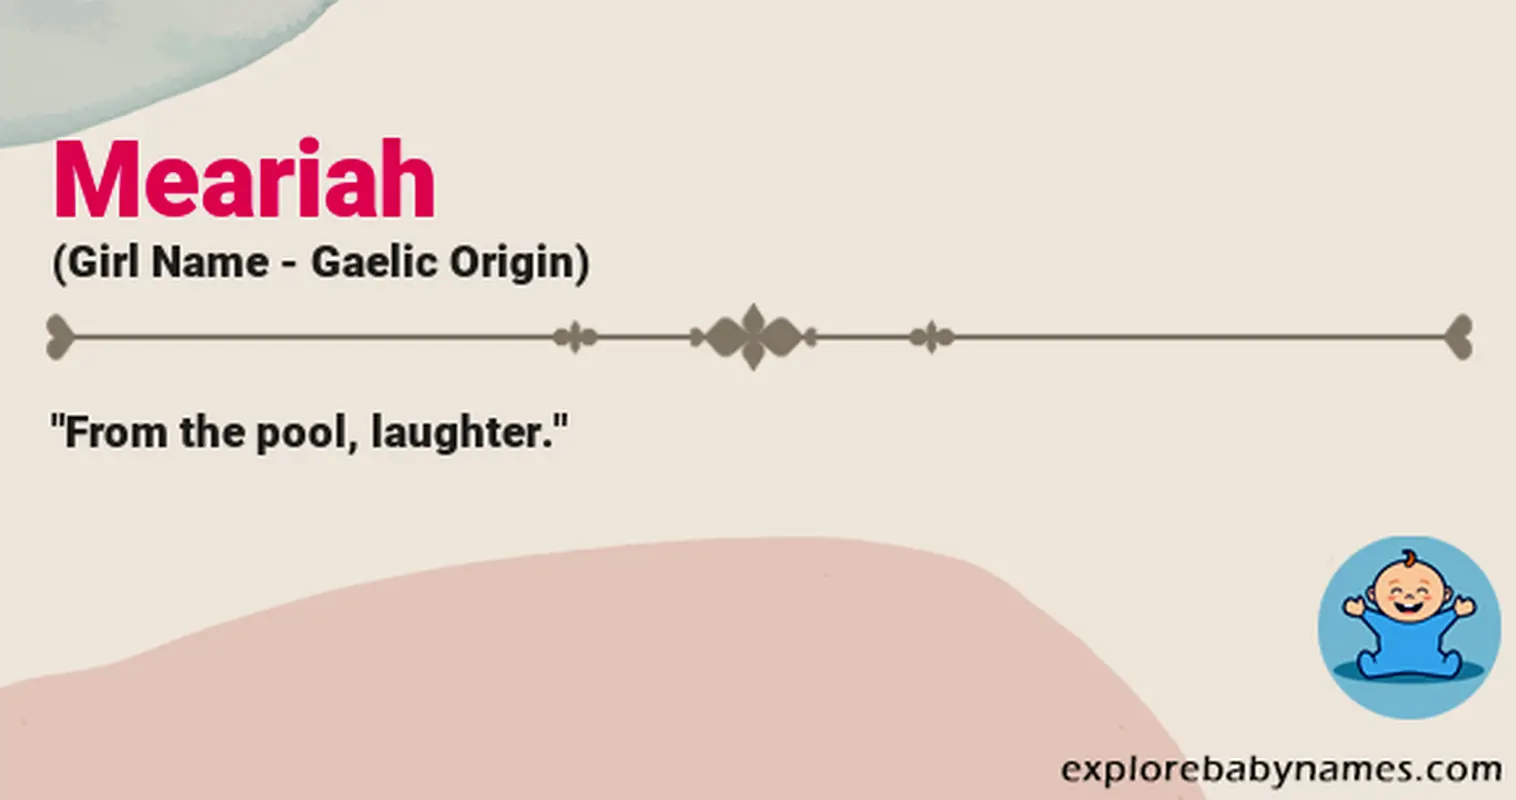 Meaning of Meariah